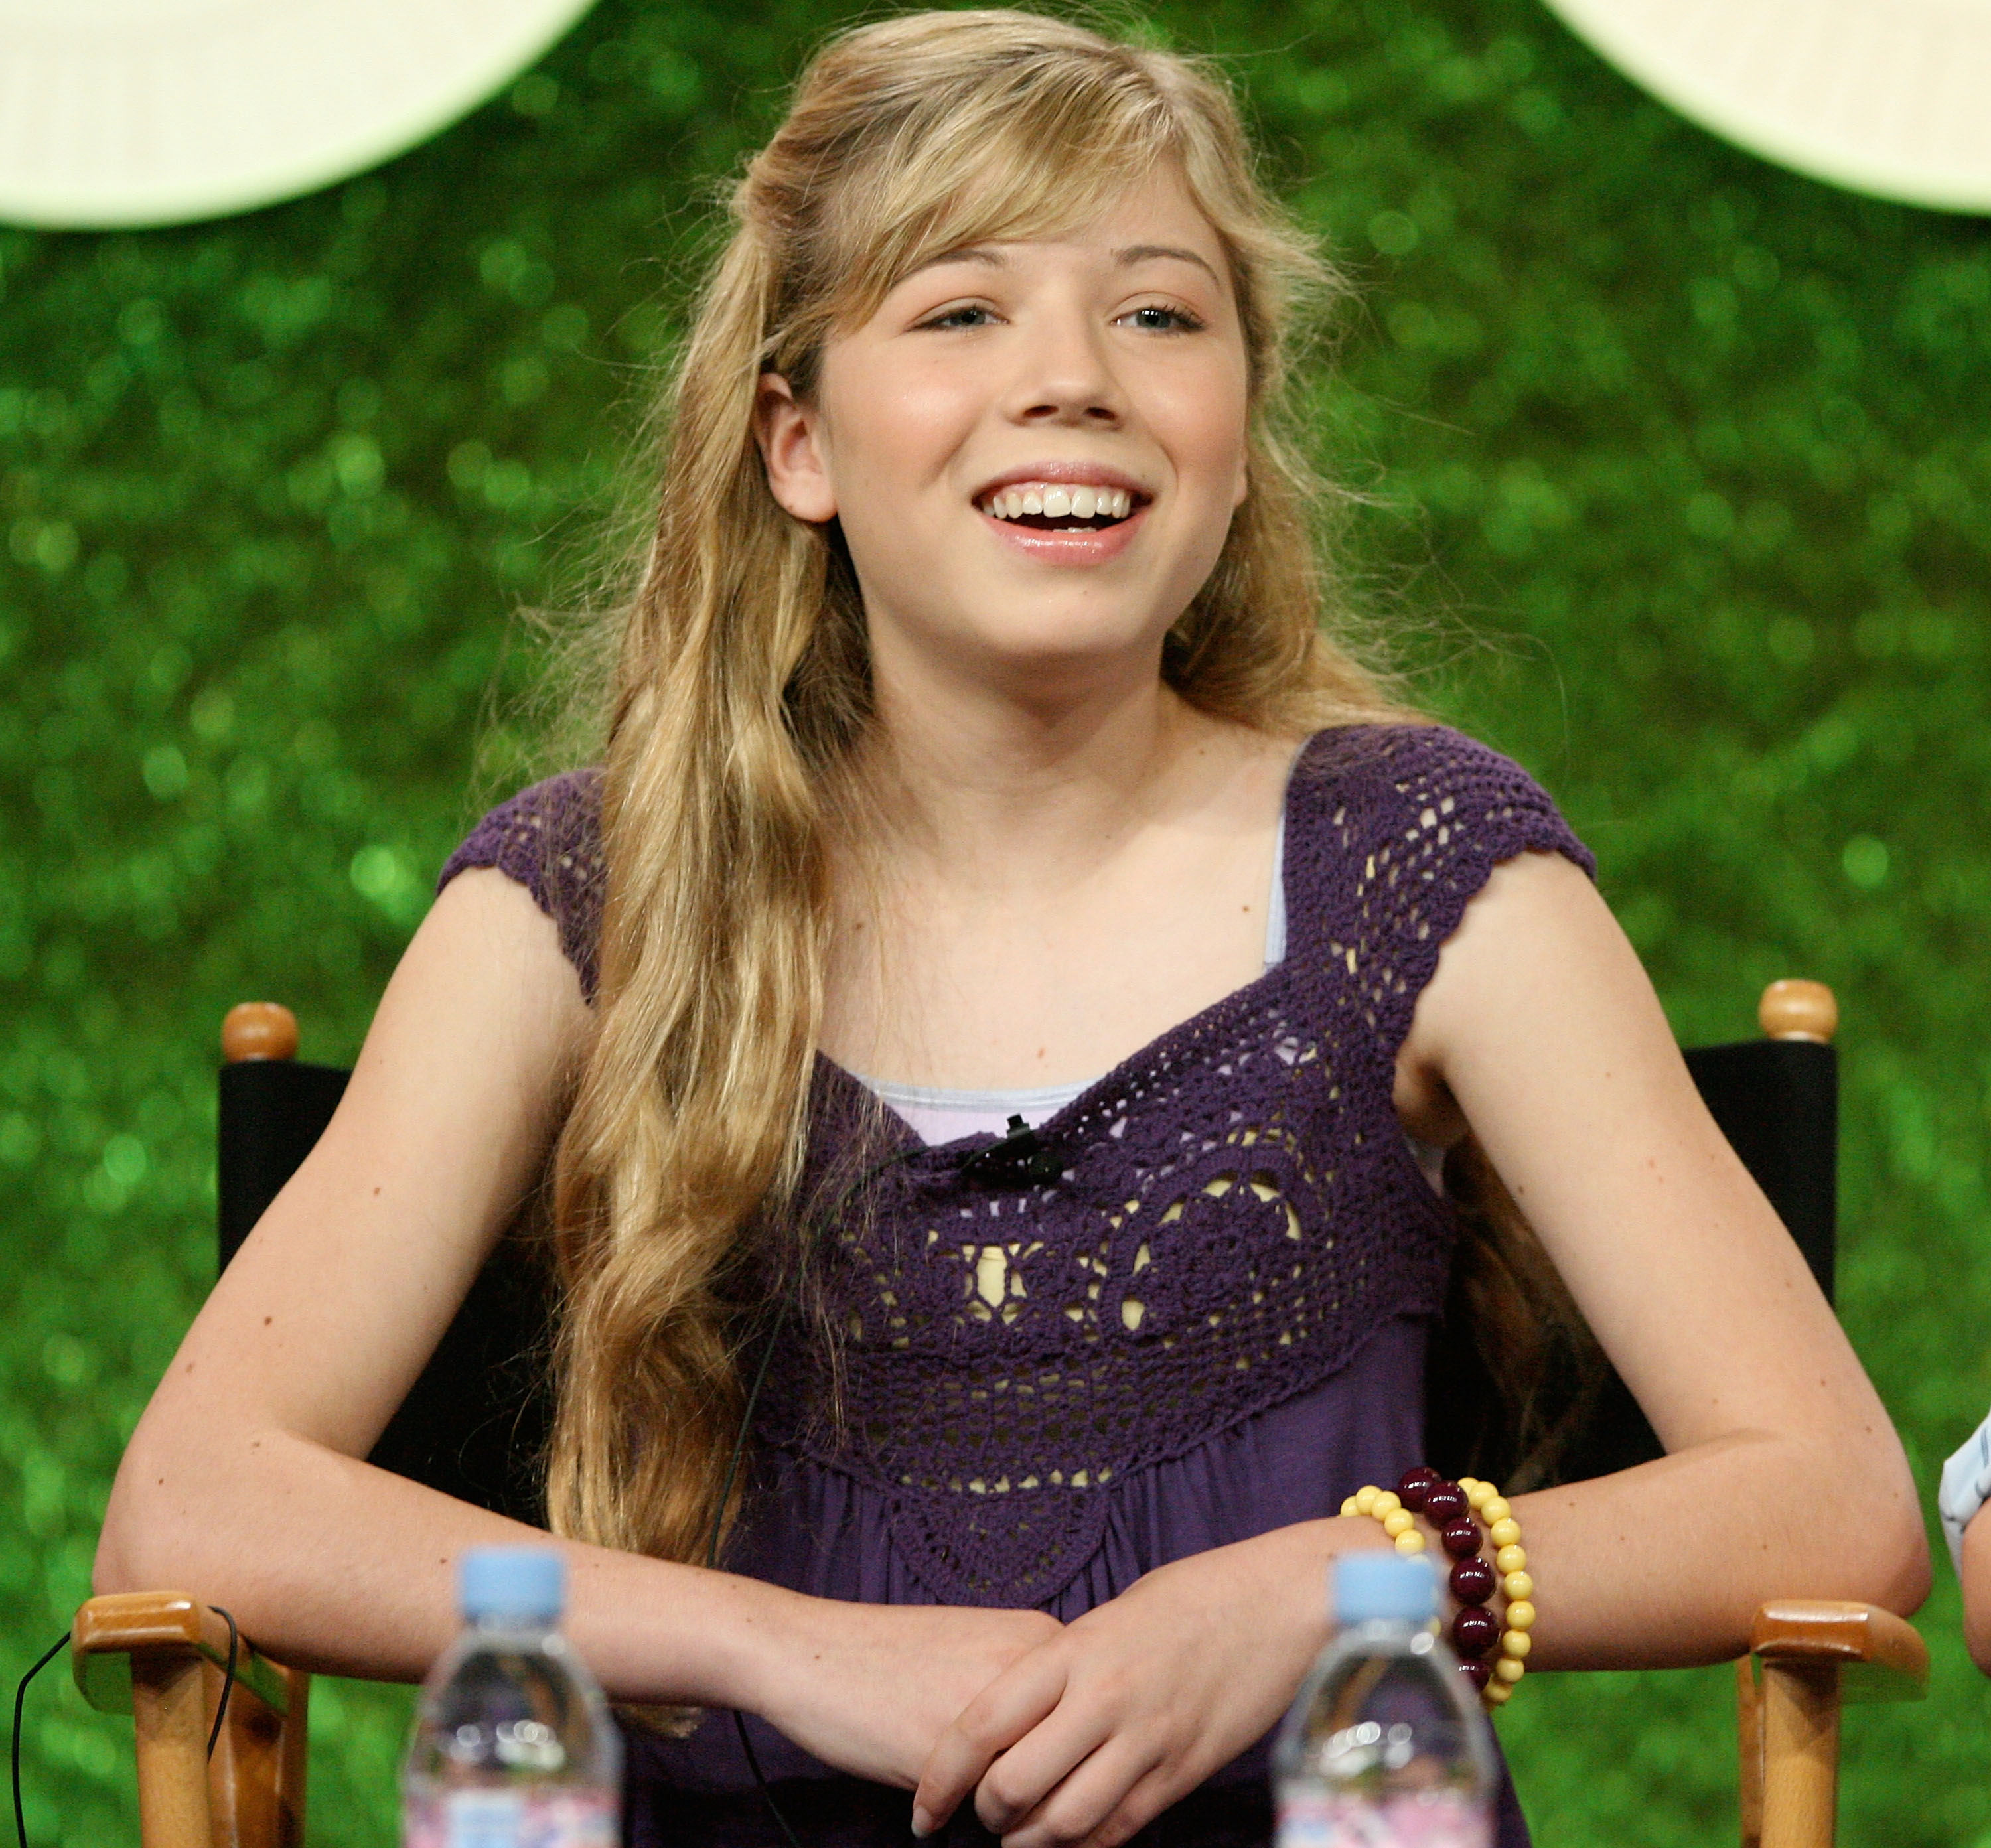 Jennette McCurdy attends the MTV Summer TCA press tour on July 13, 2007 | Source: Getty Images